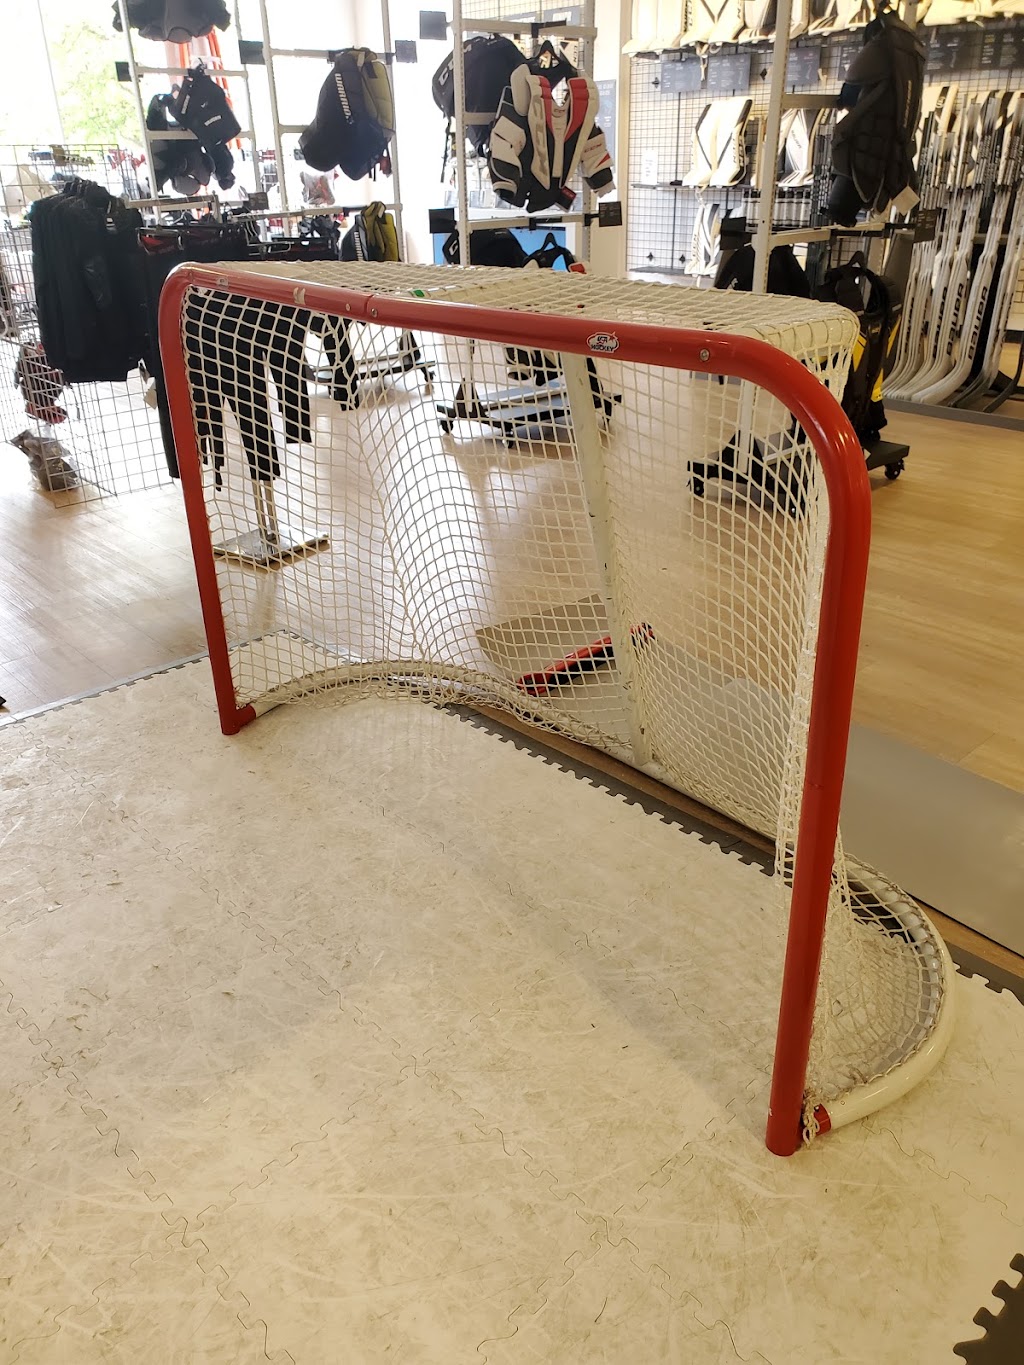 Pure Hockey | 21031 Tripleseven Rd Suite 100, Sterling, VA 20165, USA | Phone: (571) 434-7404